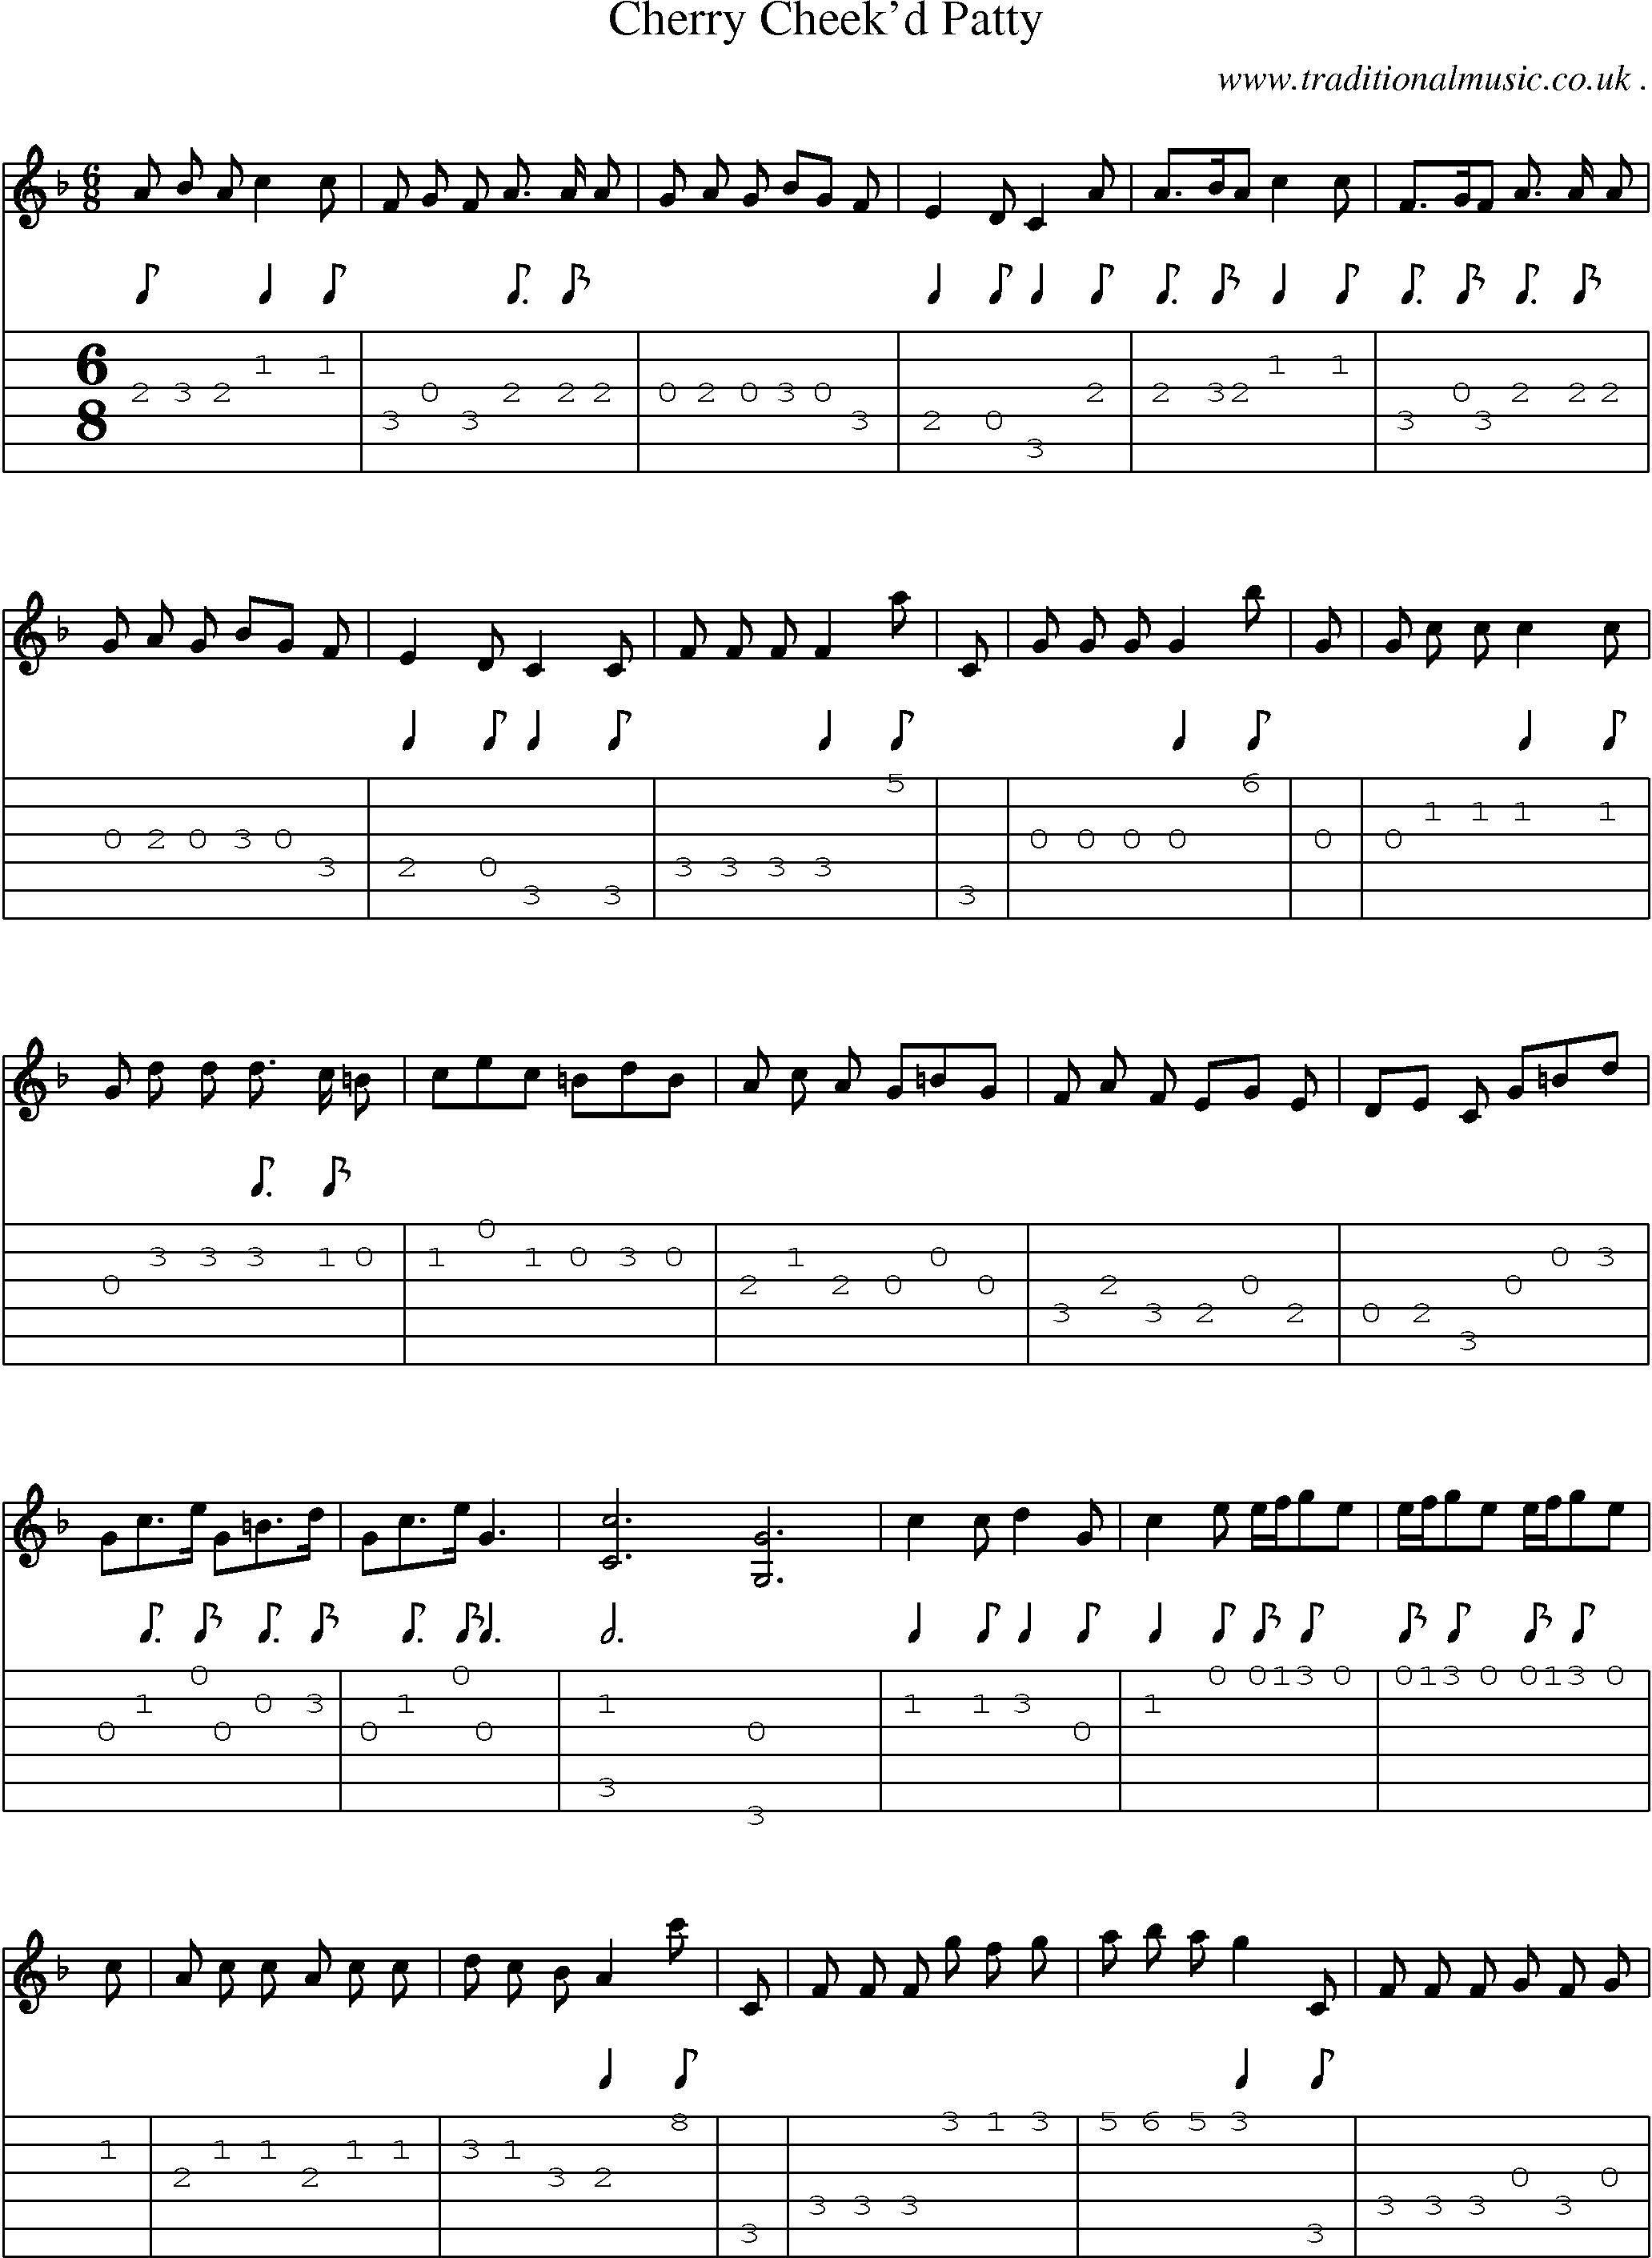 Sheet-Music and Guitar Tabs for Cherry Cheekd Patty